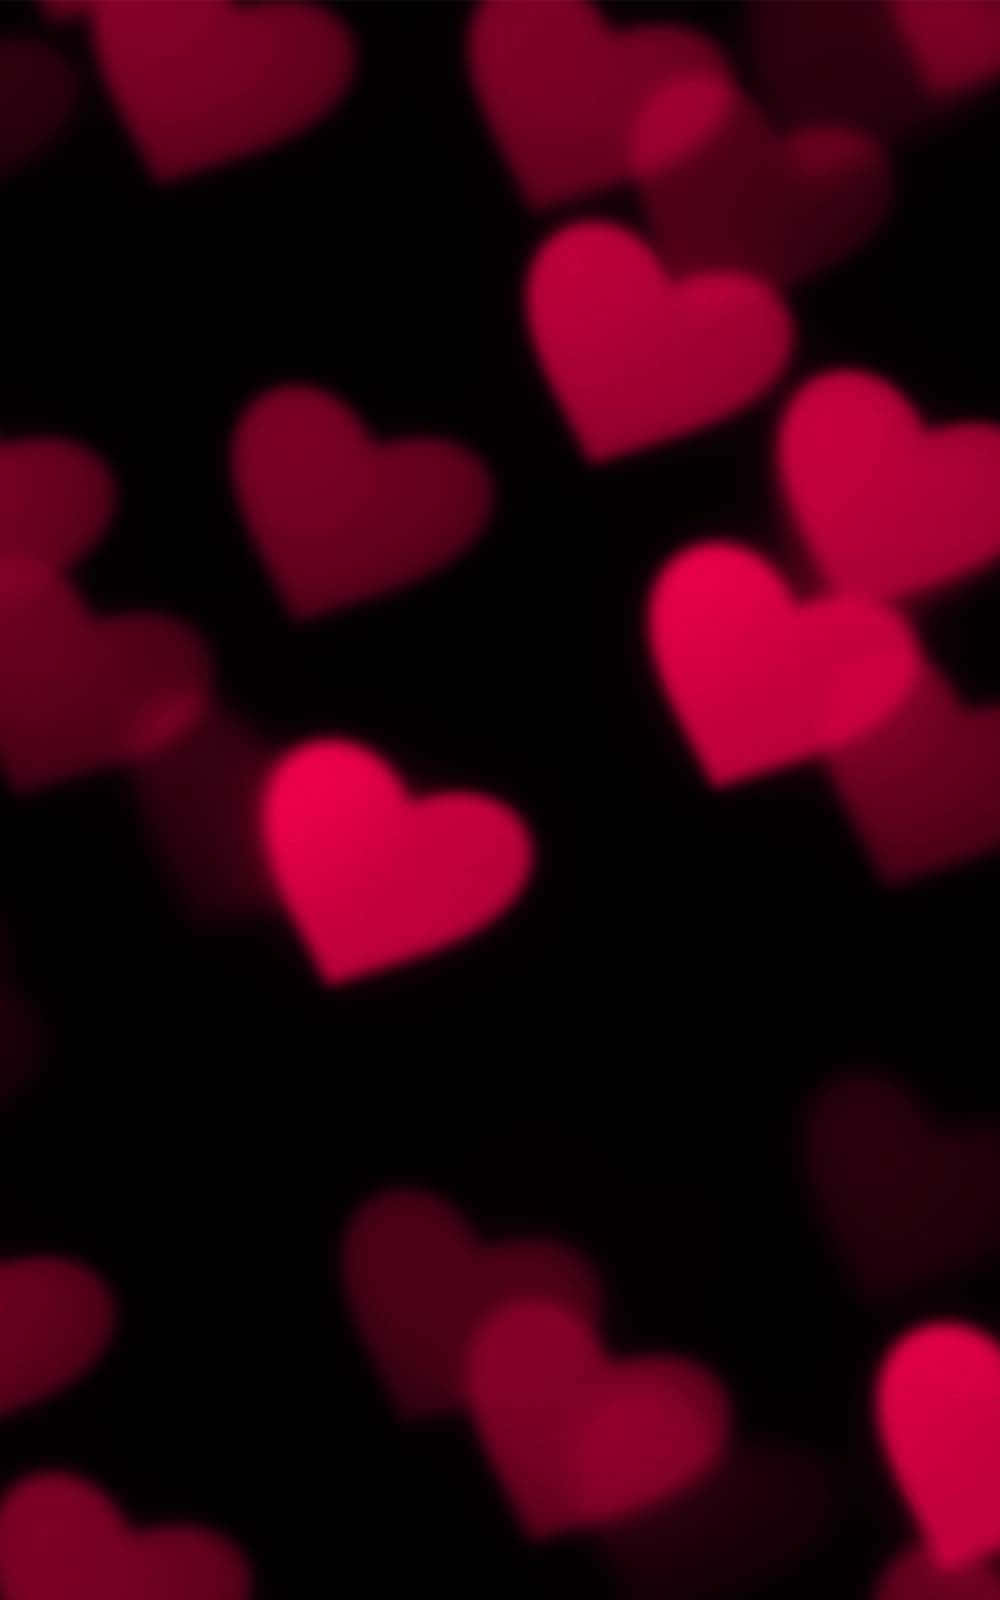 A beautiful background of pink hearts